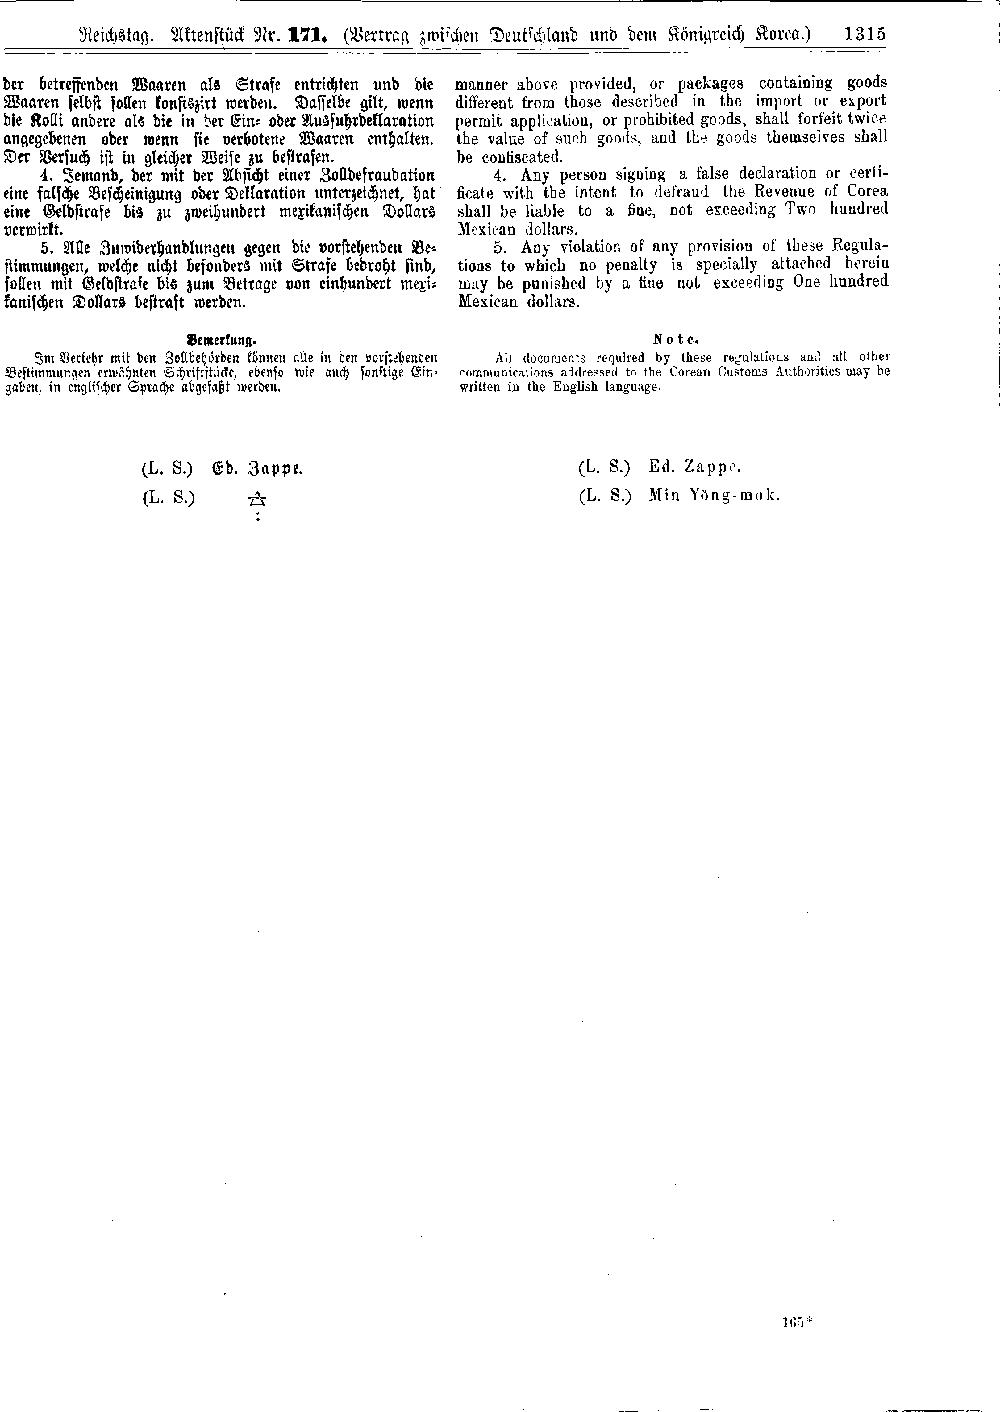 Scan of page 1315